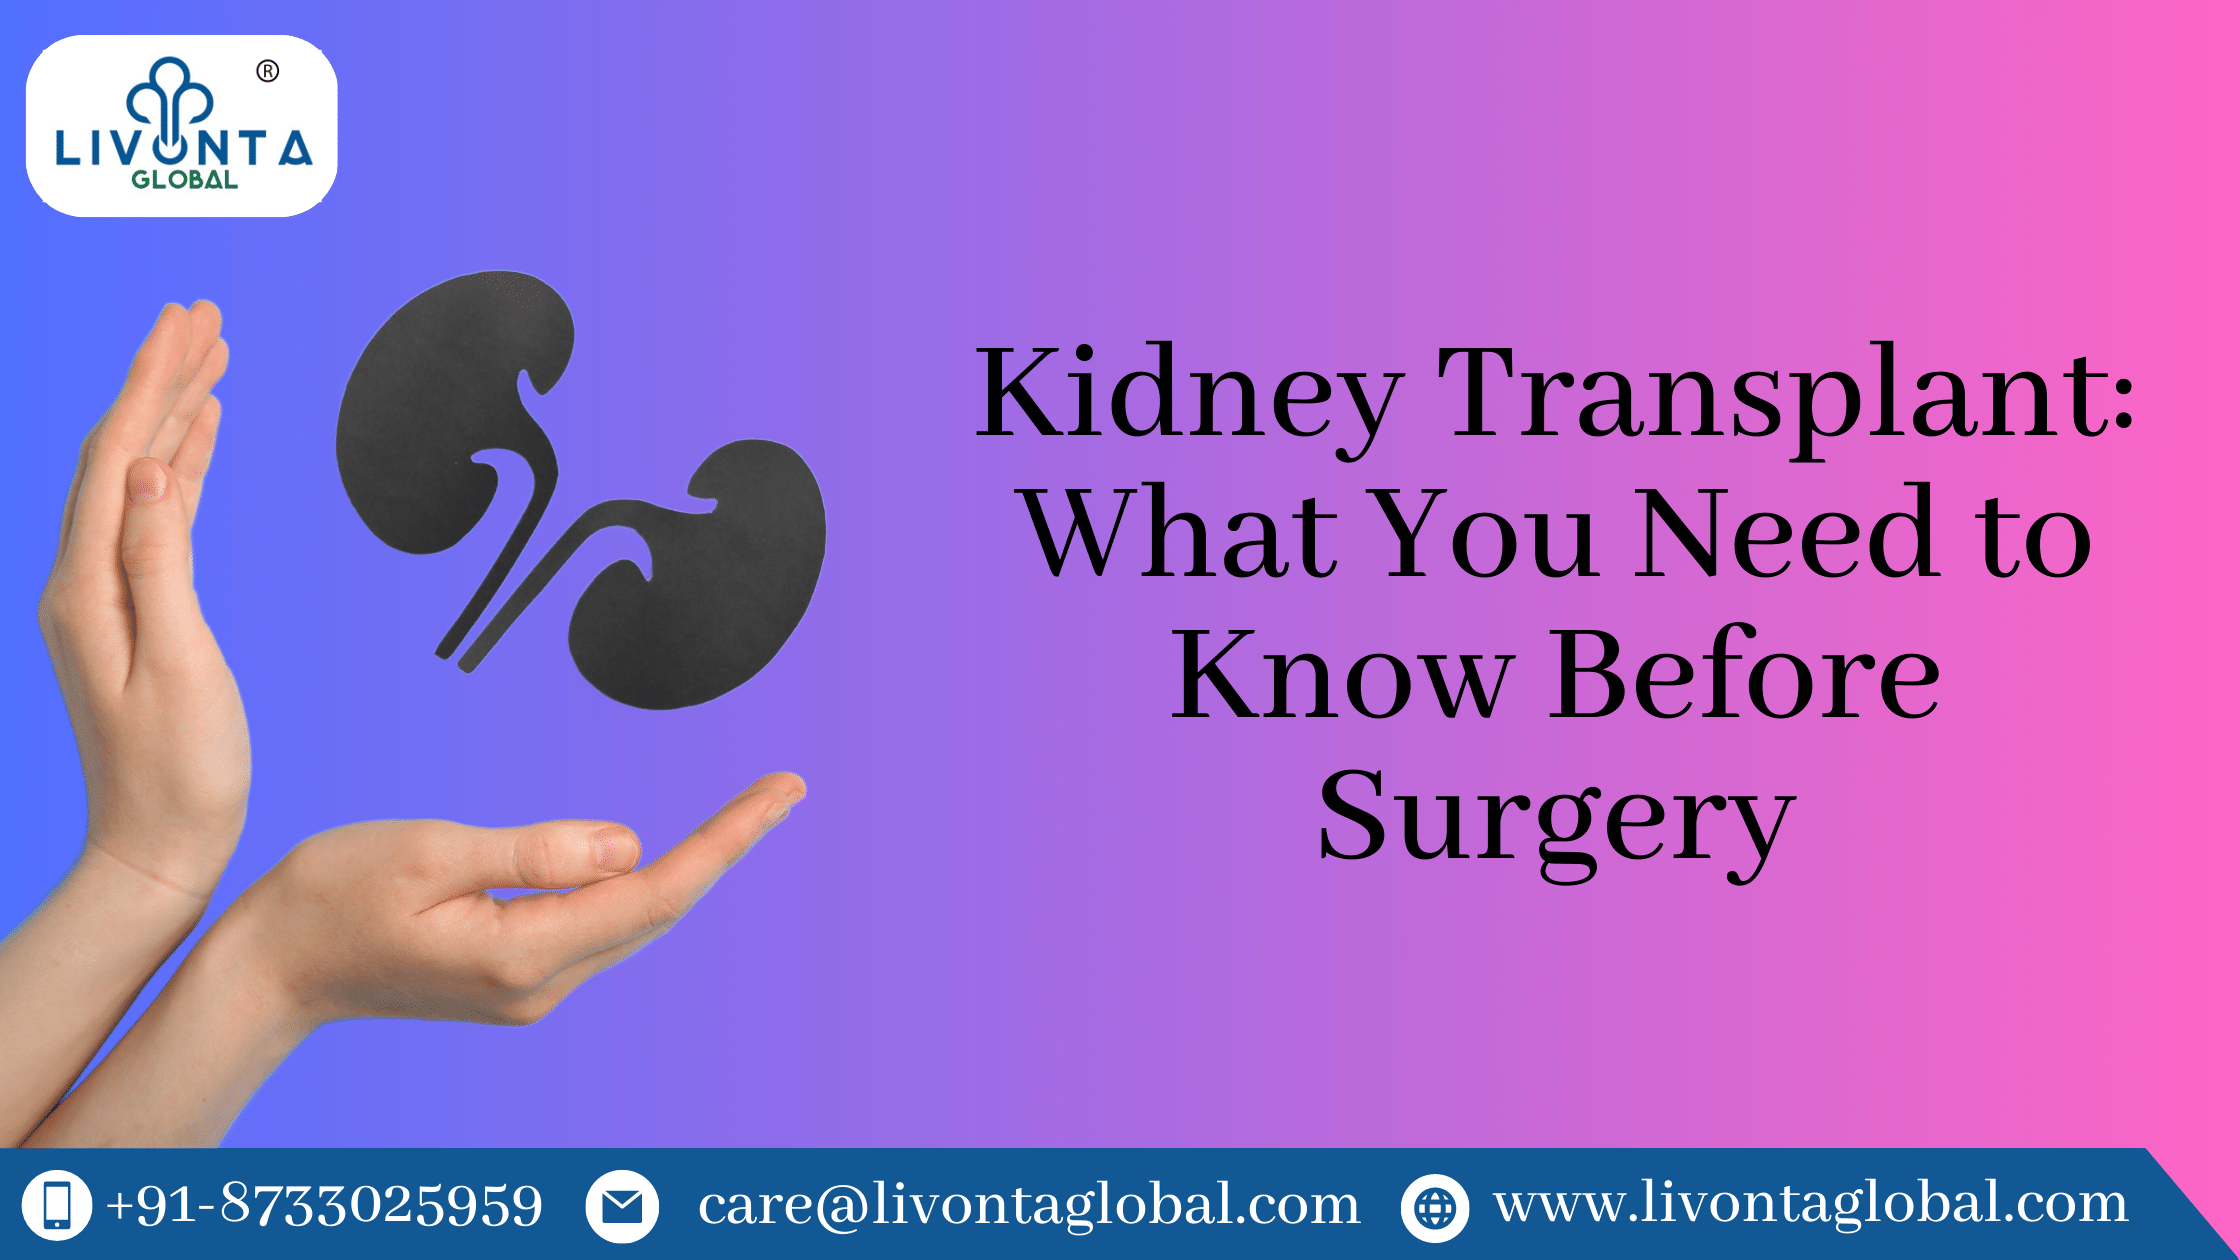 Kidney Transplant: What You Need to Know Before Surgery